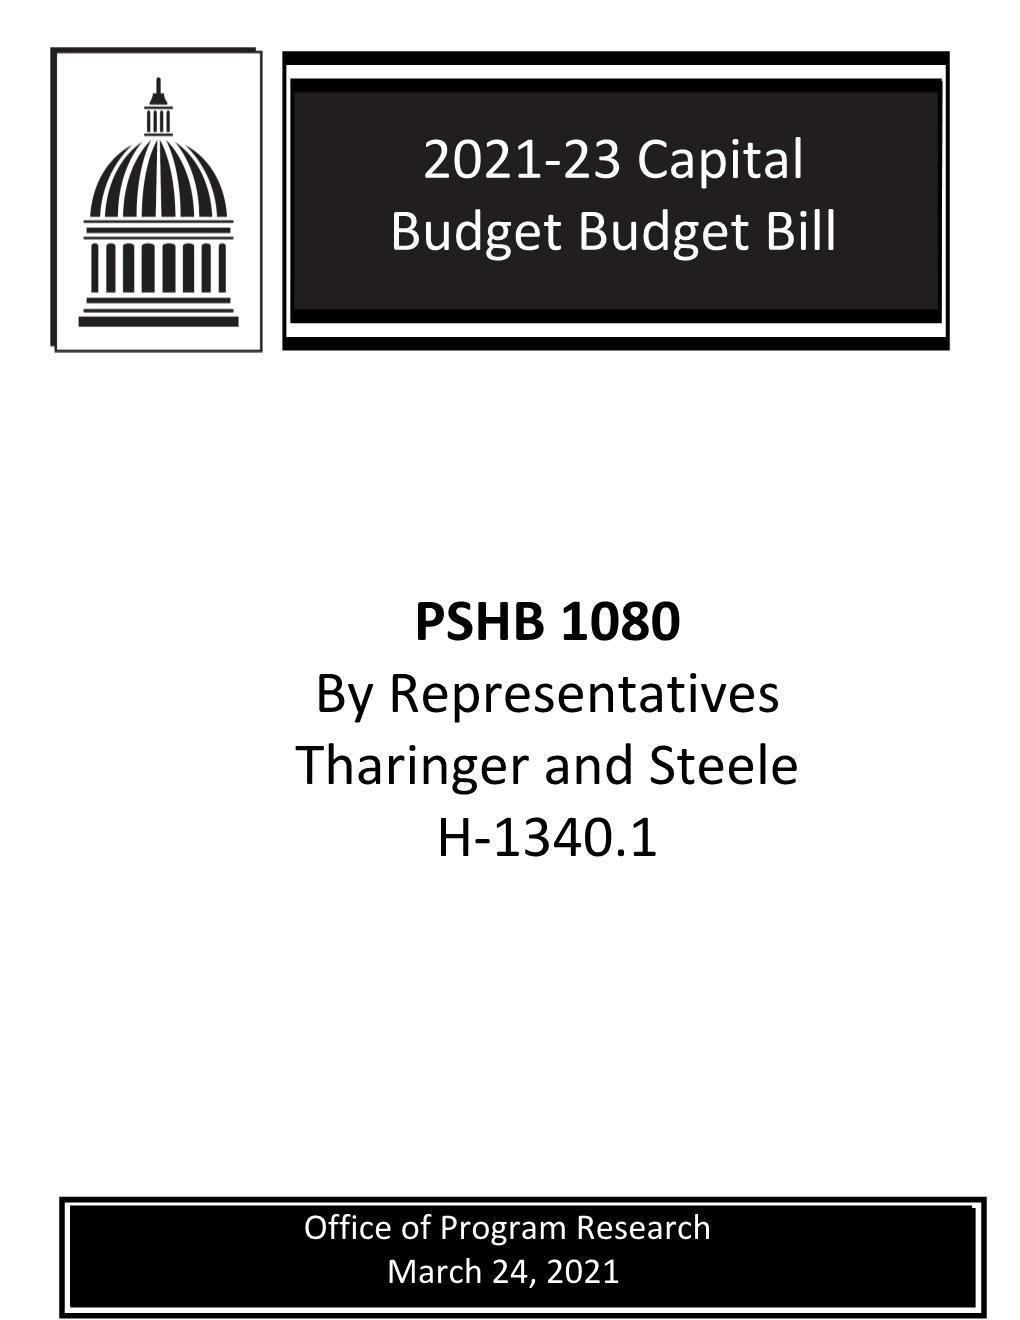 2021-23 Capital Budget Budget Bill PSHB 1080 by Representatives Tharinger and Steele H-1340.1